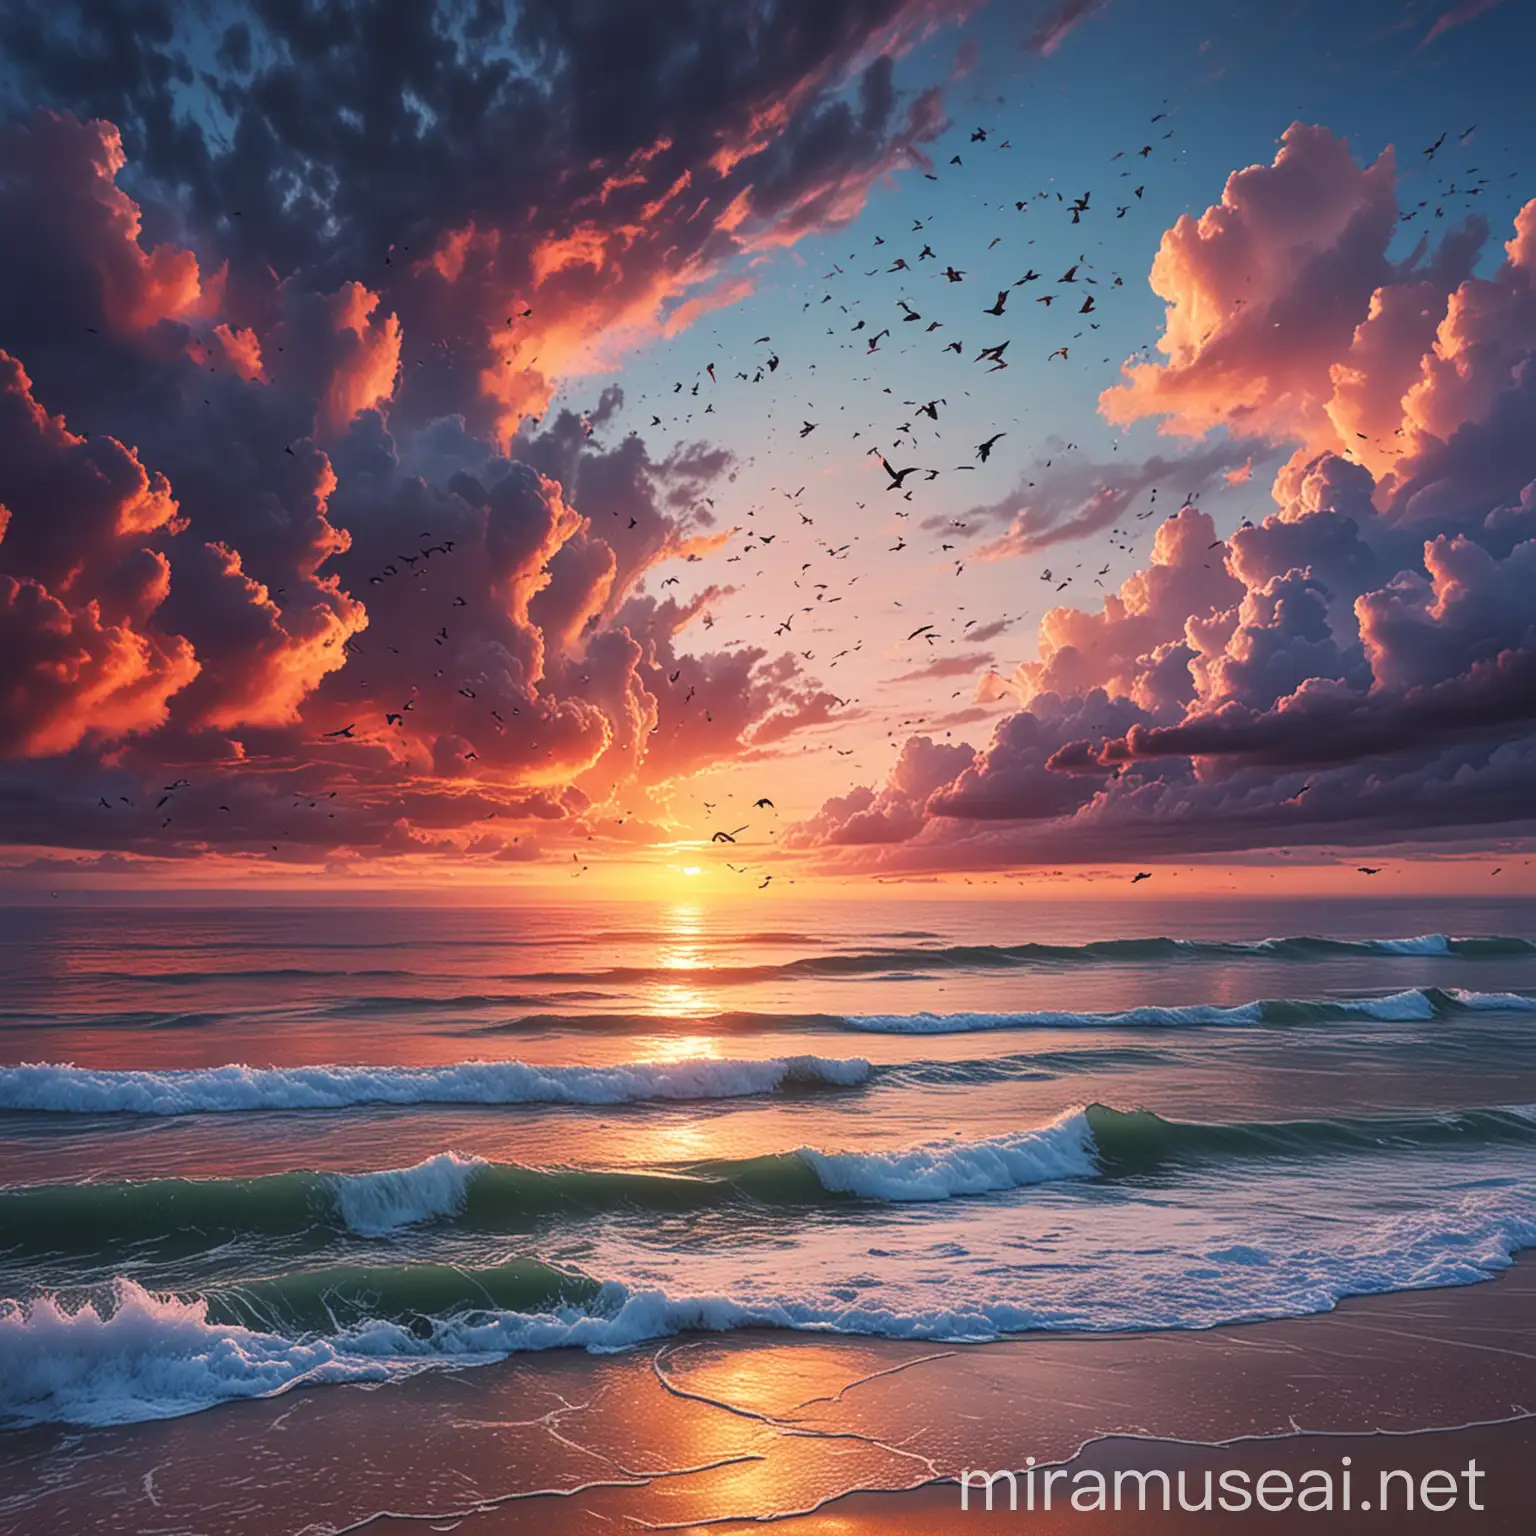 Tranquil Seascape with Vibrant Sky and Soaring Birds